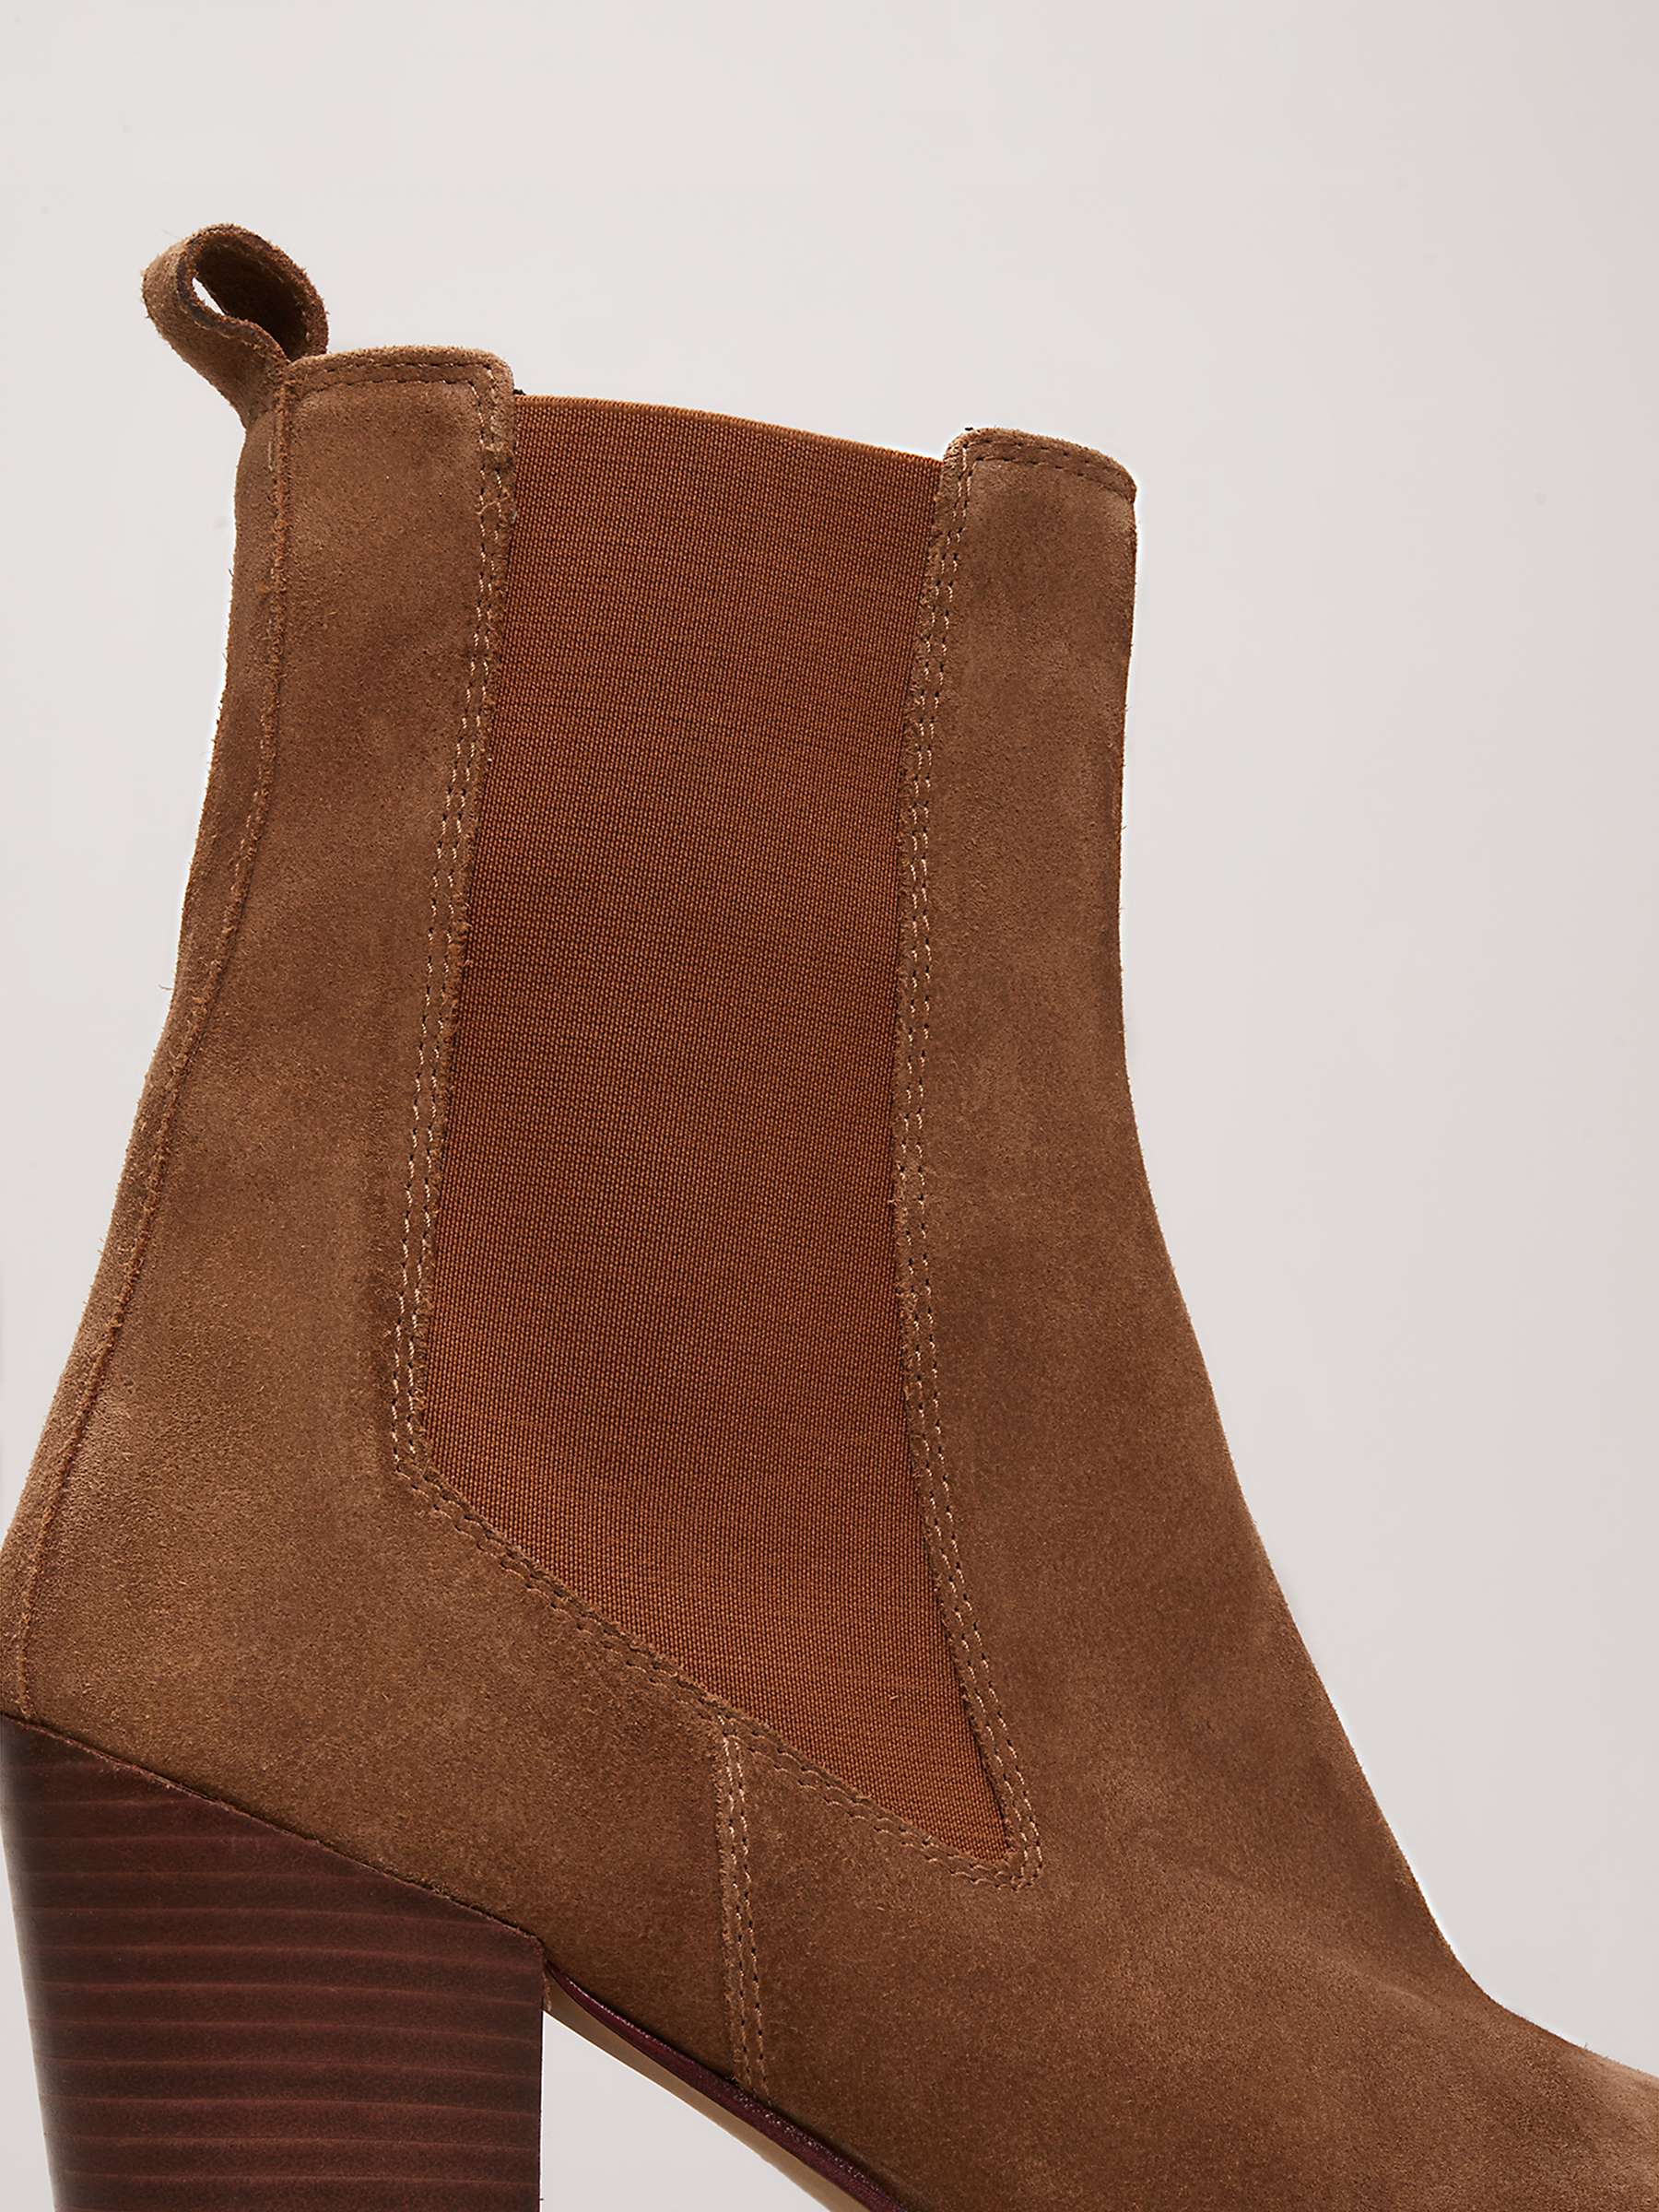 Buy Phase Eight Suede Cowboy Boots, Tan Online at johnlewis.com